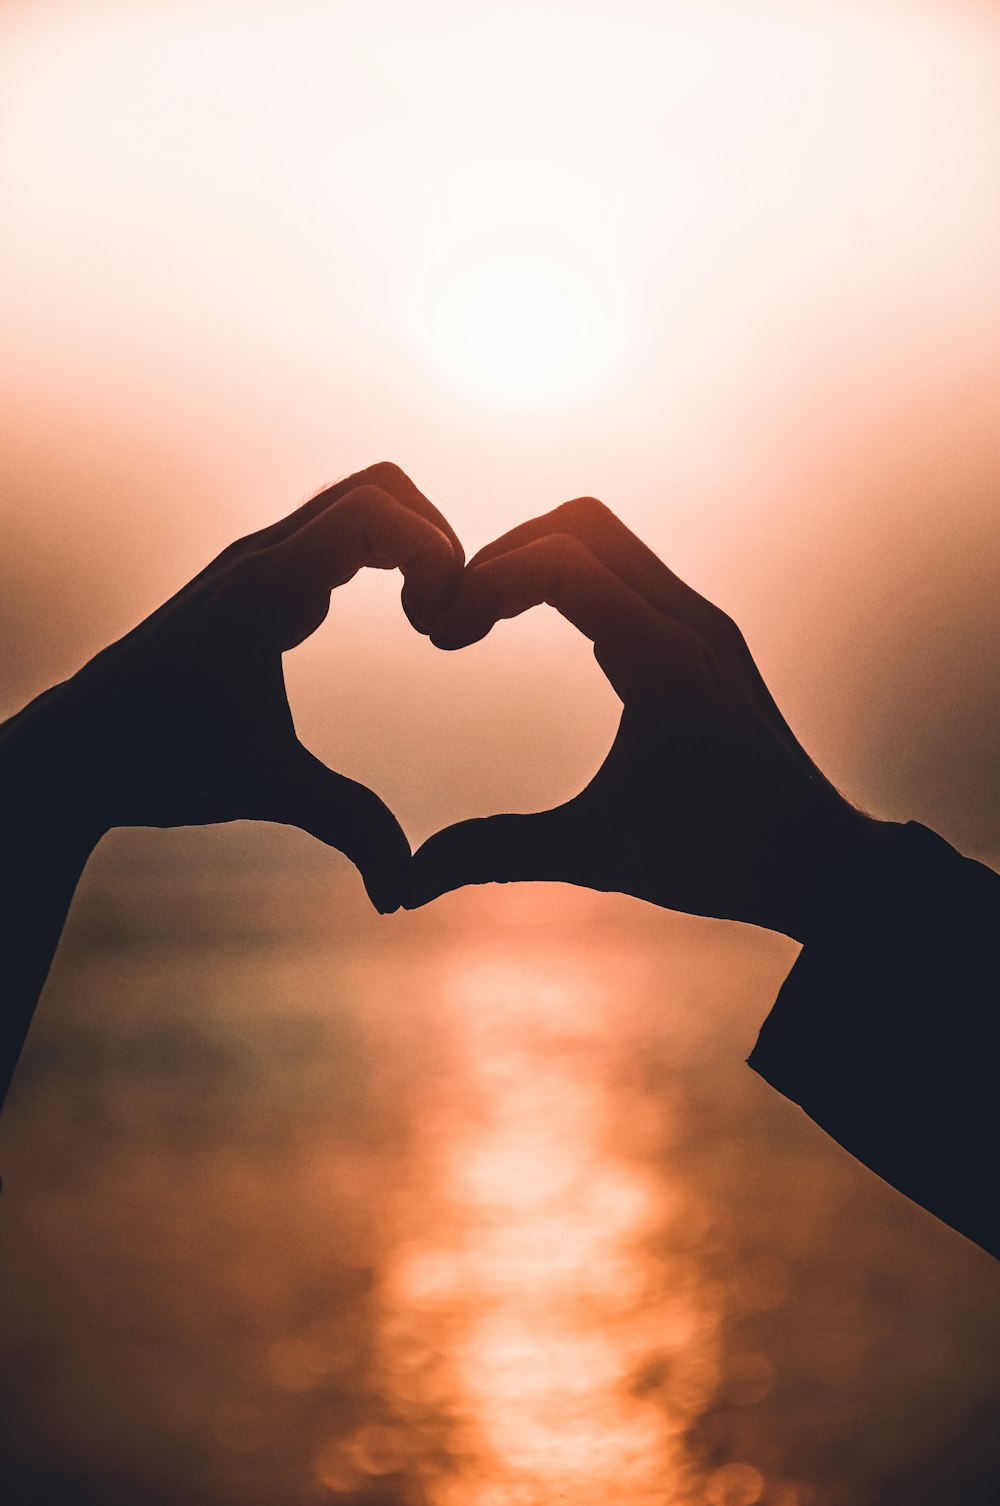 1000+ Love Hand Pictures | Download Free Images on Unsplash